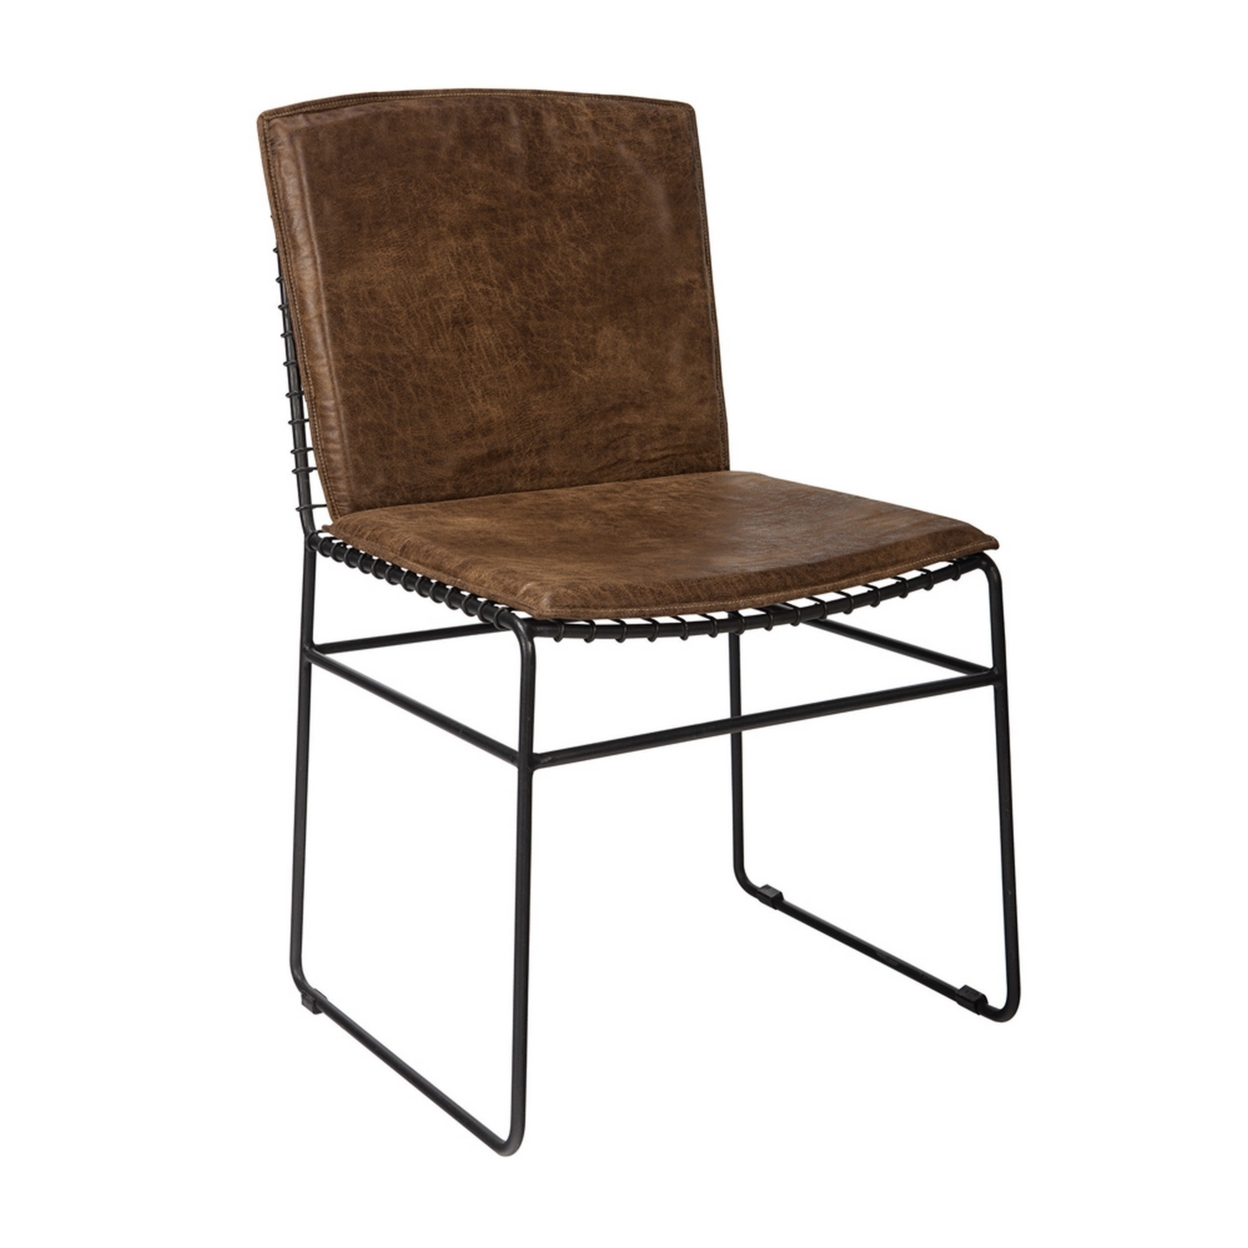 Grid Metal Leatherette Side Chairs With Sled Base, Set Of 2, Brown And Black- Saltoro Sherpi